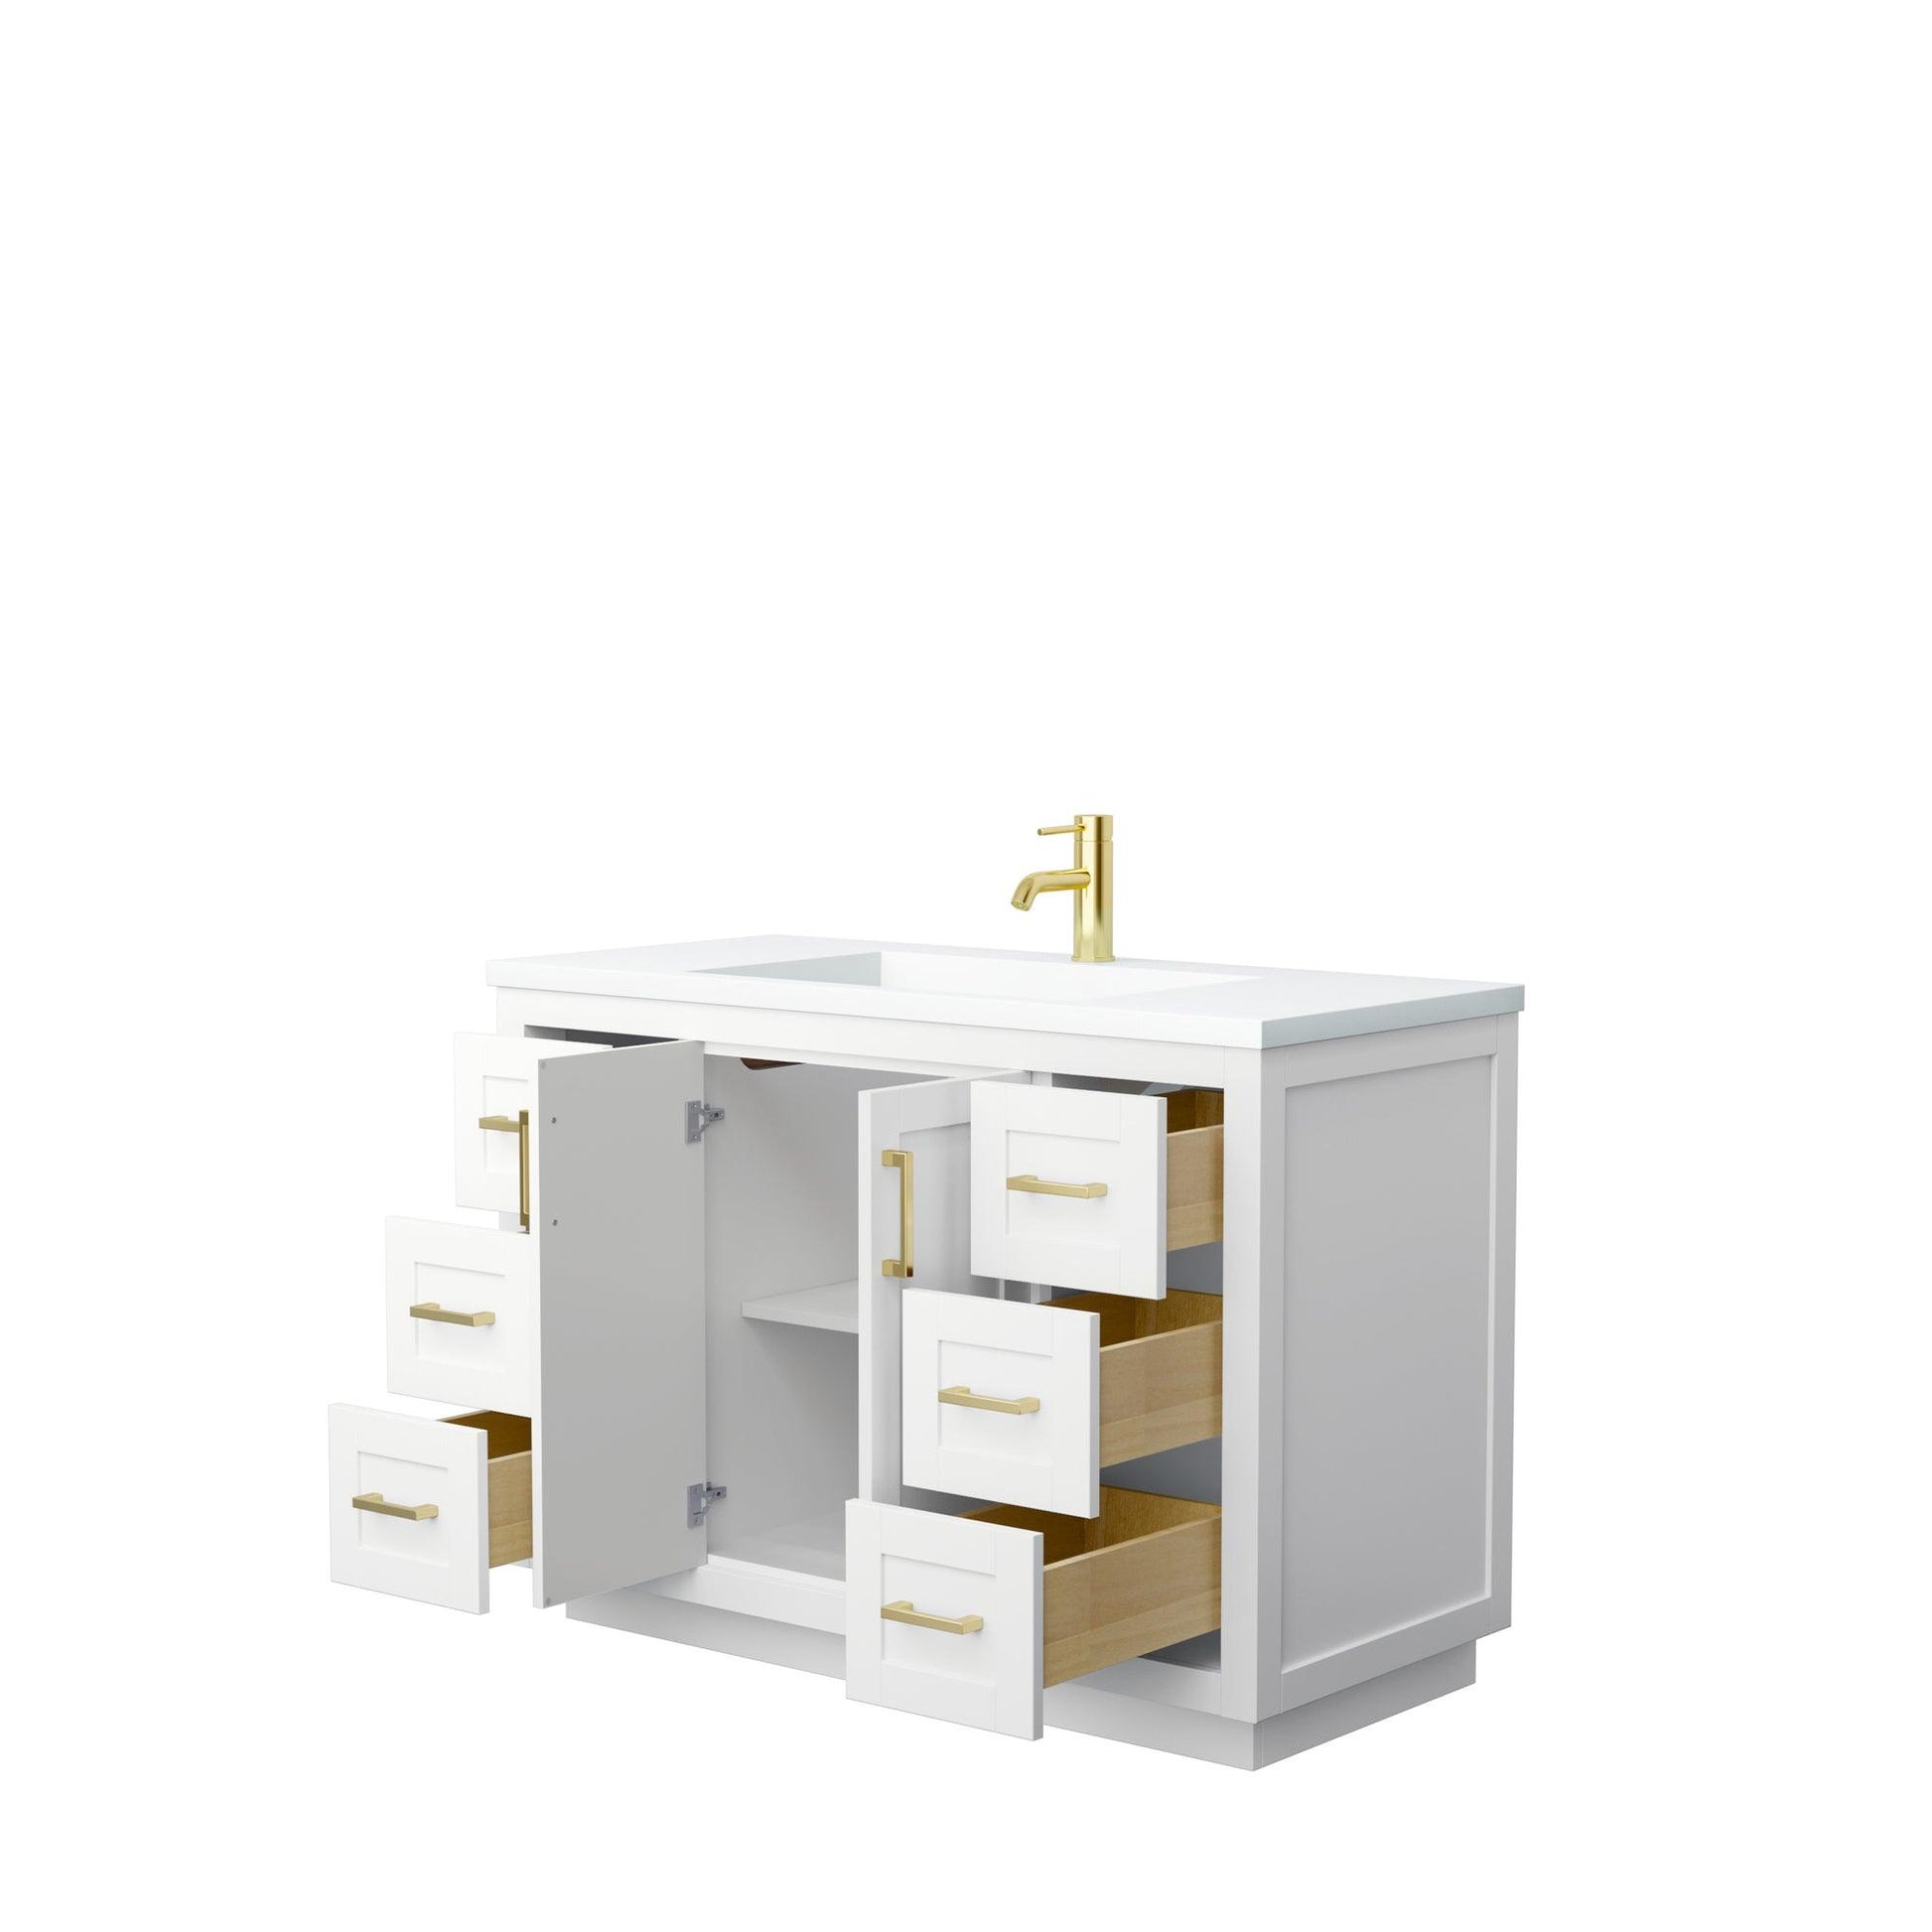 
  
  Wyndham Collection Miranda Single Bathroom Vanity in White, 1.25 Inch Thick Matte White Solid Surface Countertop, Integrated Sink, Complementary Trim, Optional Mirror
  
